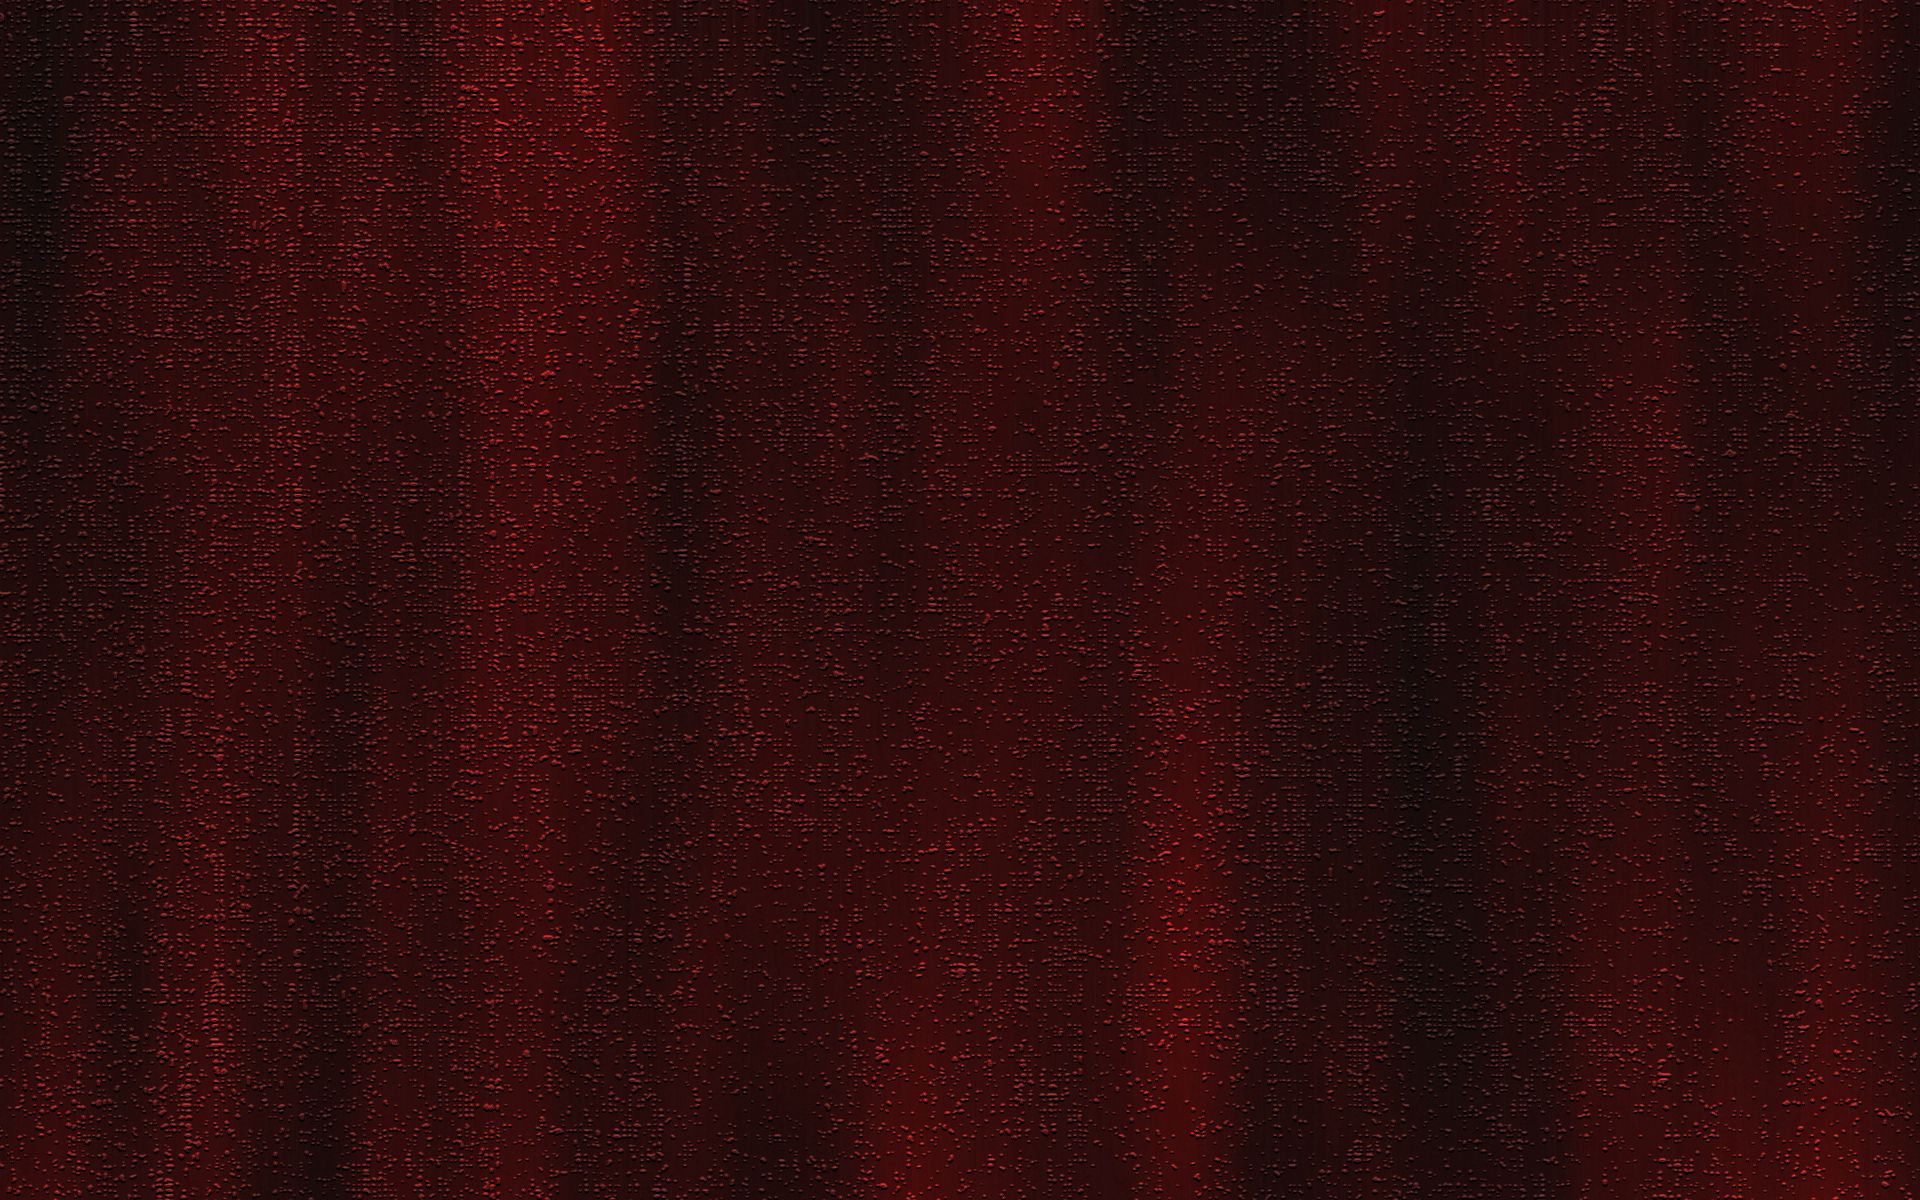 Wallpaper for mobile devices surface, shadow, textures, point